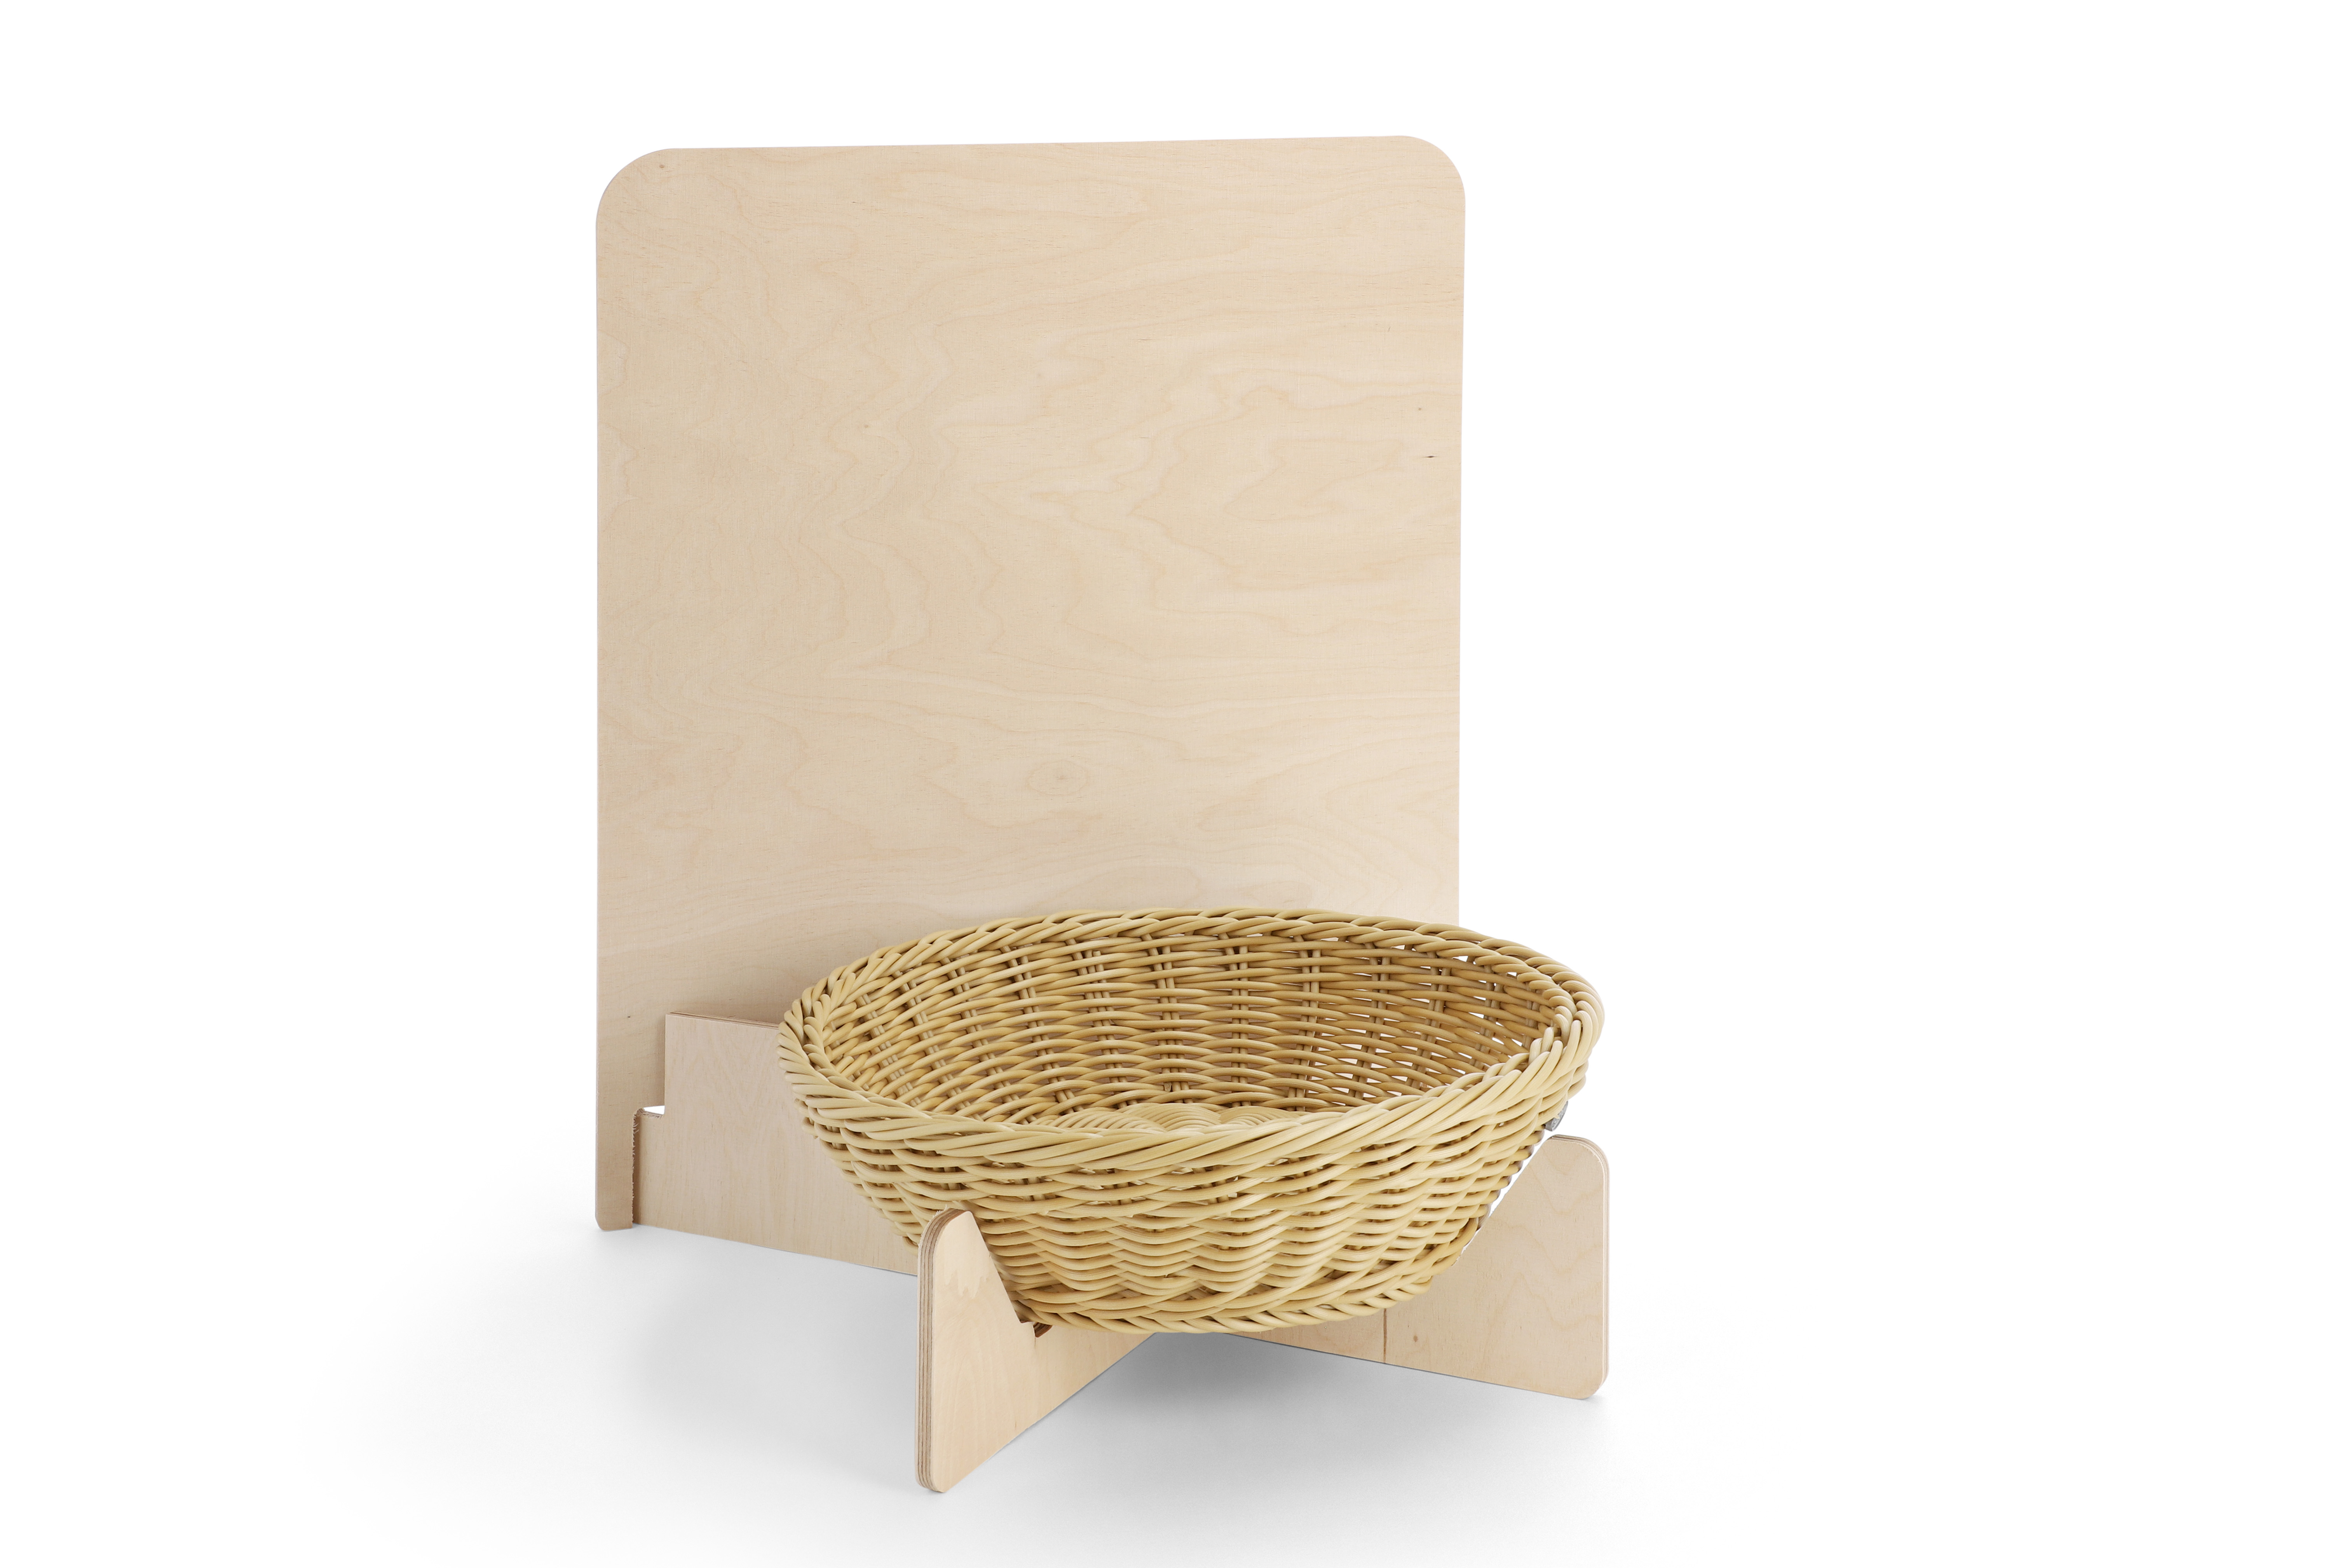 Counter Displays with Wicker Basket